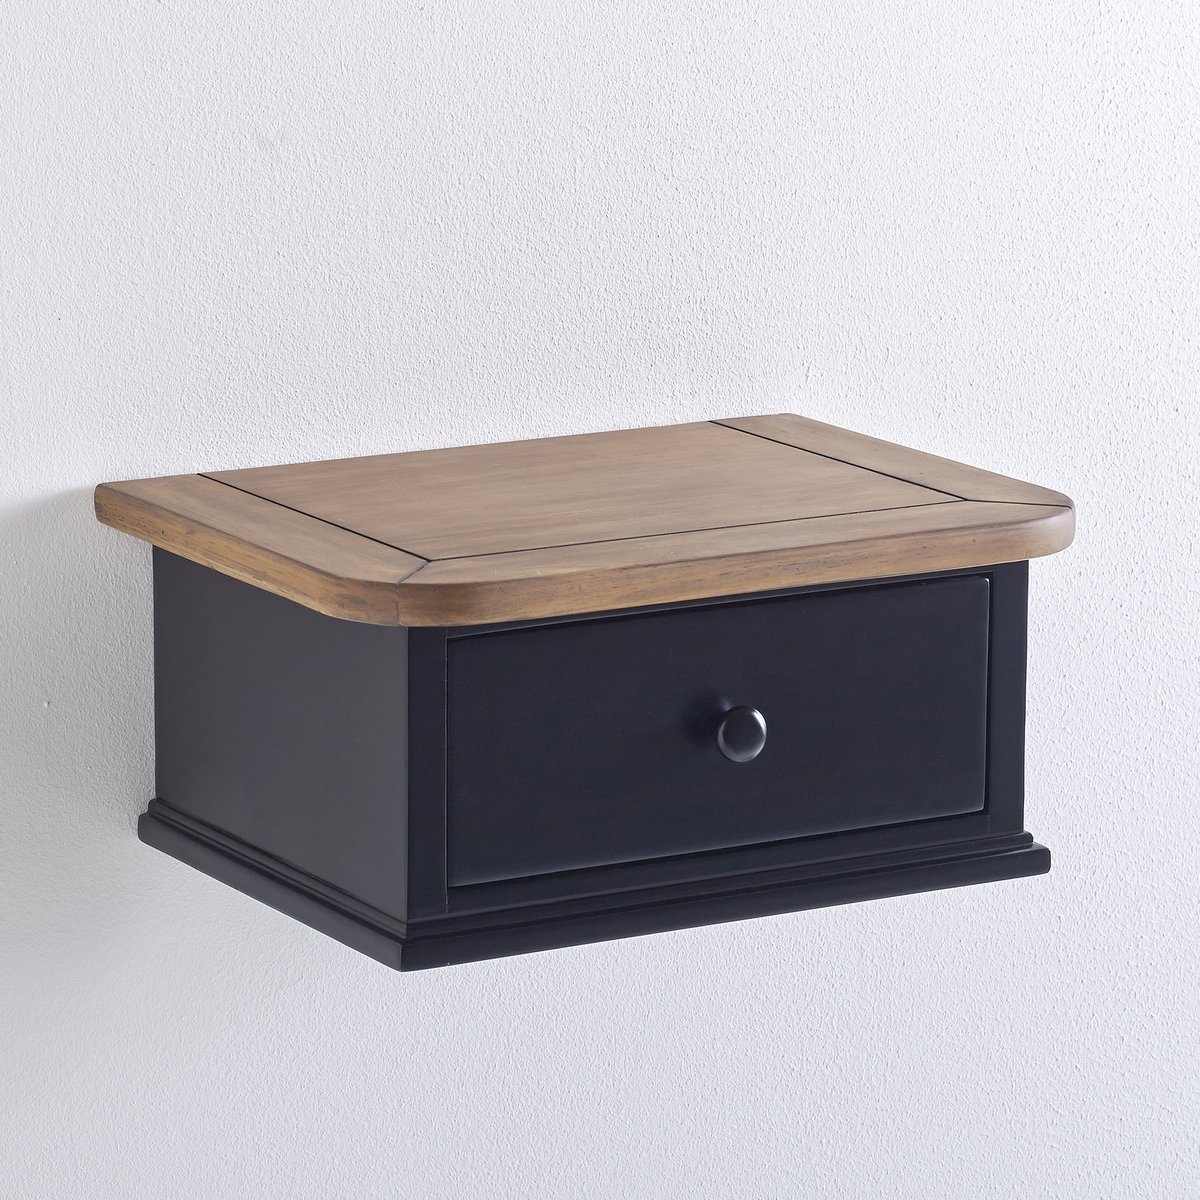 Image of Lipstick Wall-Mounted Pine Bedside Table